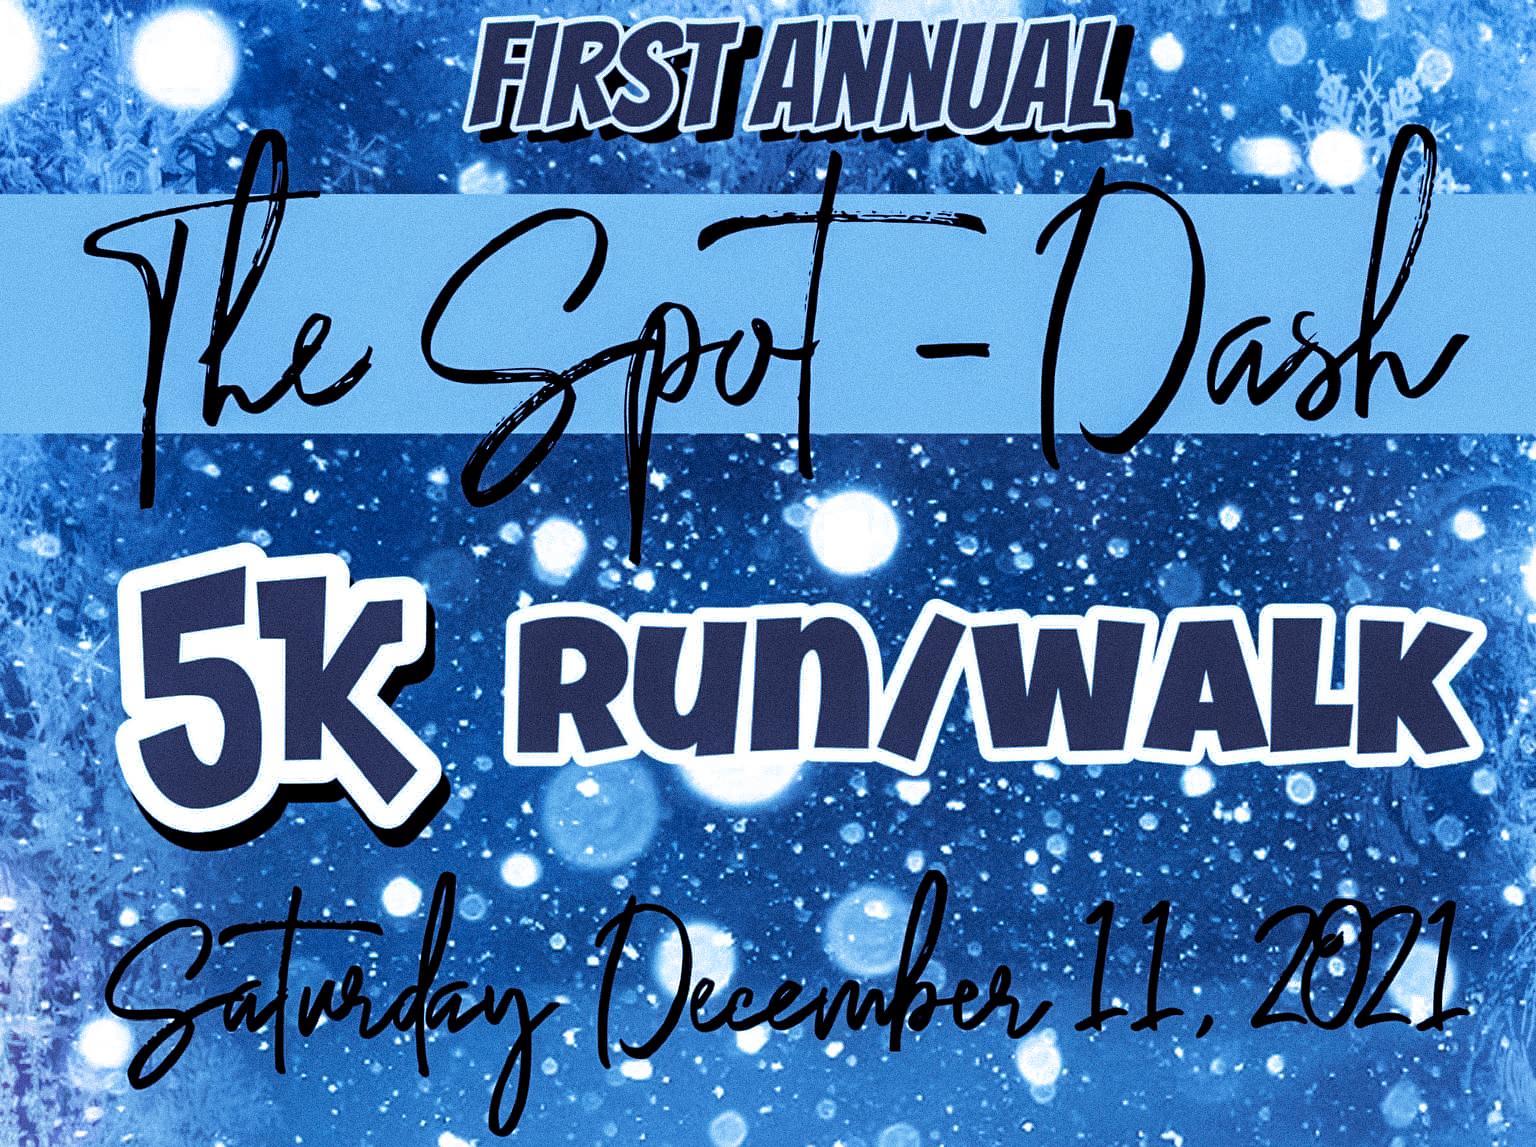 First annual Spot Dash 5k to debut this weekend